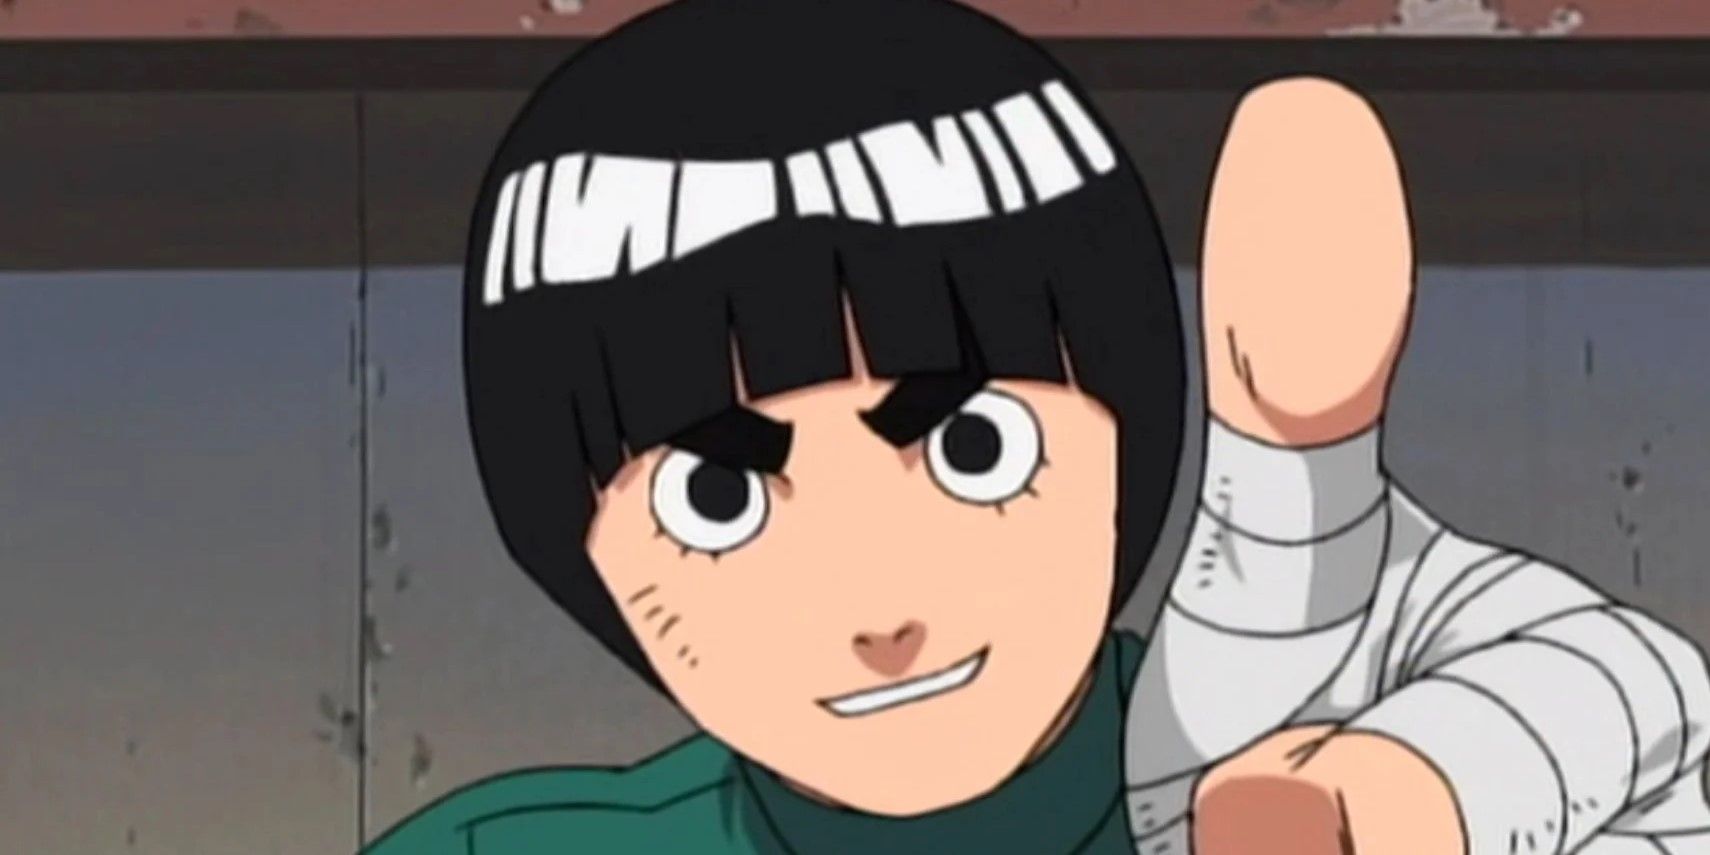 Rock Lee smiling and doing a thumbs up.